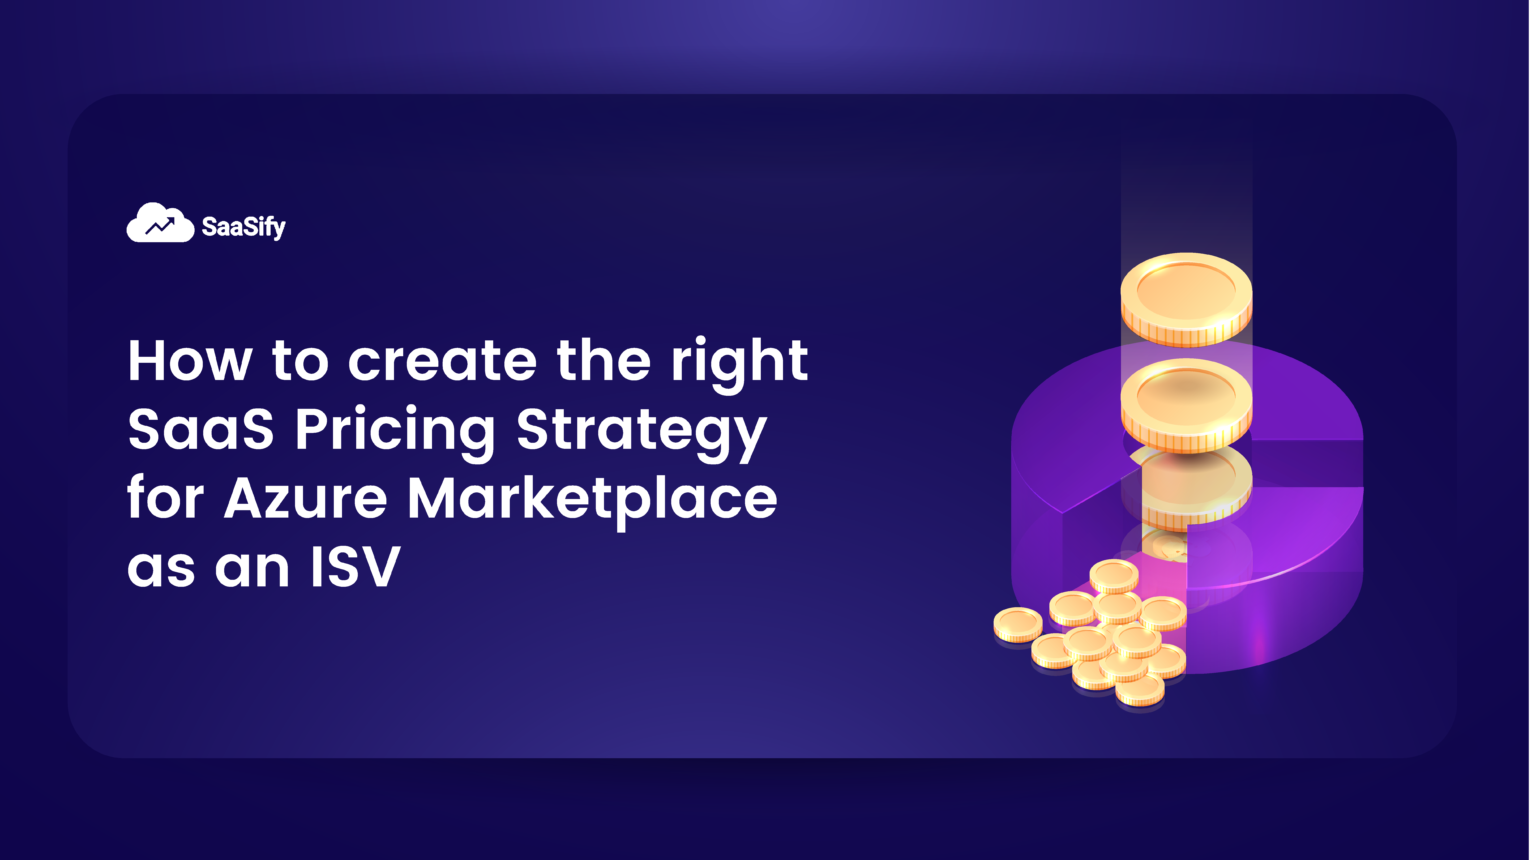 How-to-create-the-right-SaaS-Pricing-Strategy-for-Azure-Marketplace-as-an-ISV-1536x860